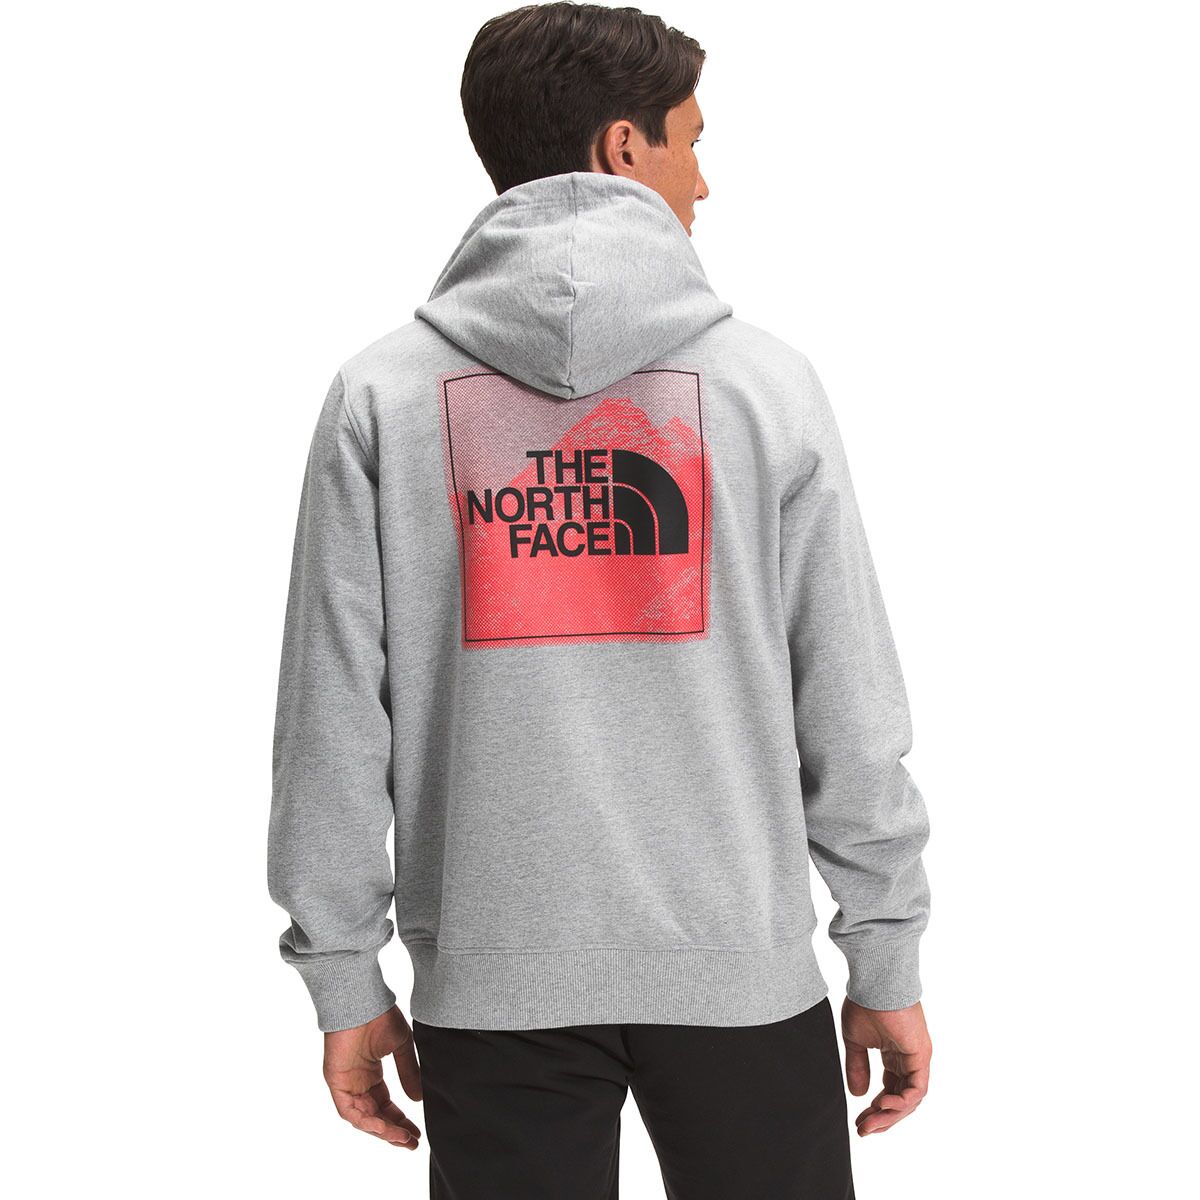 The North Face Coordinates Pullover Hoodie - Men's